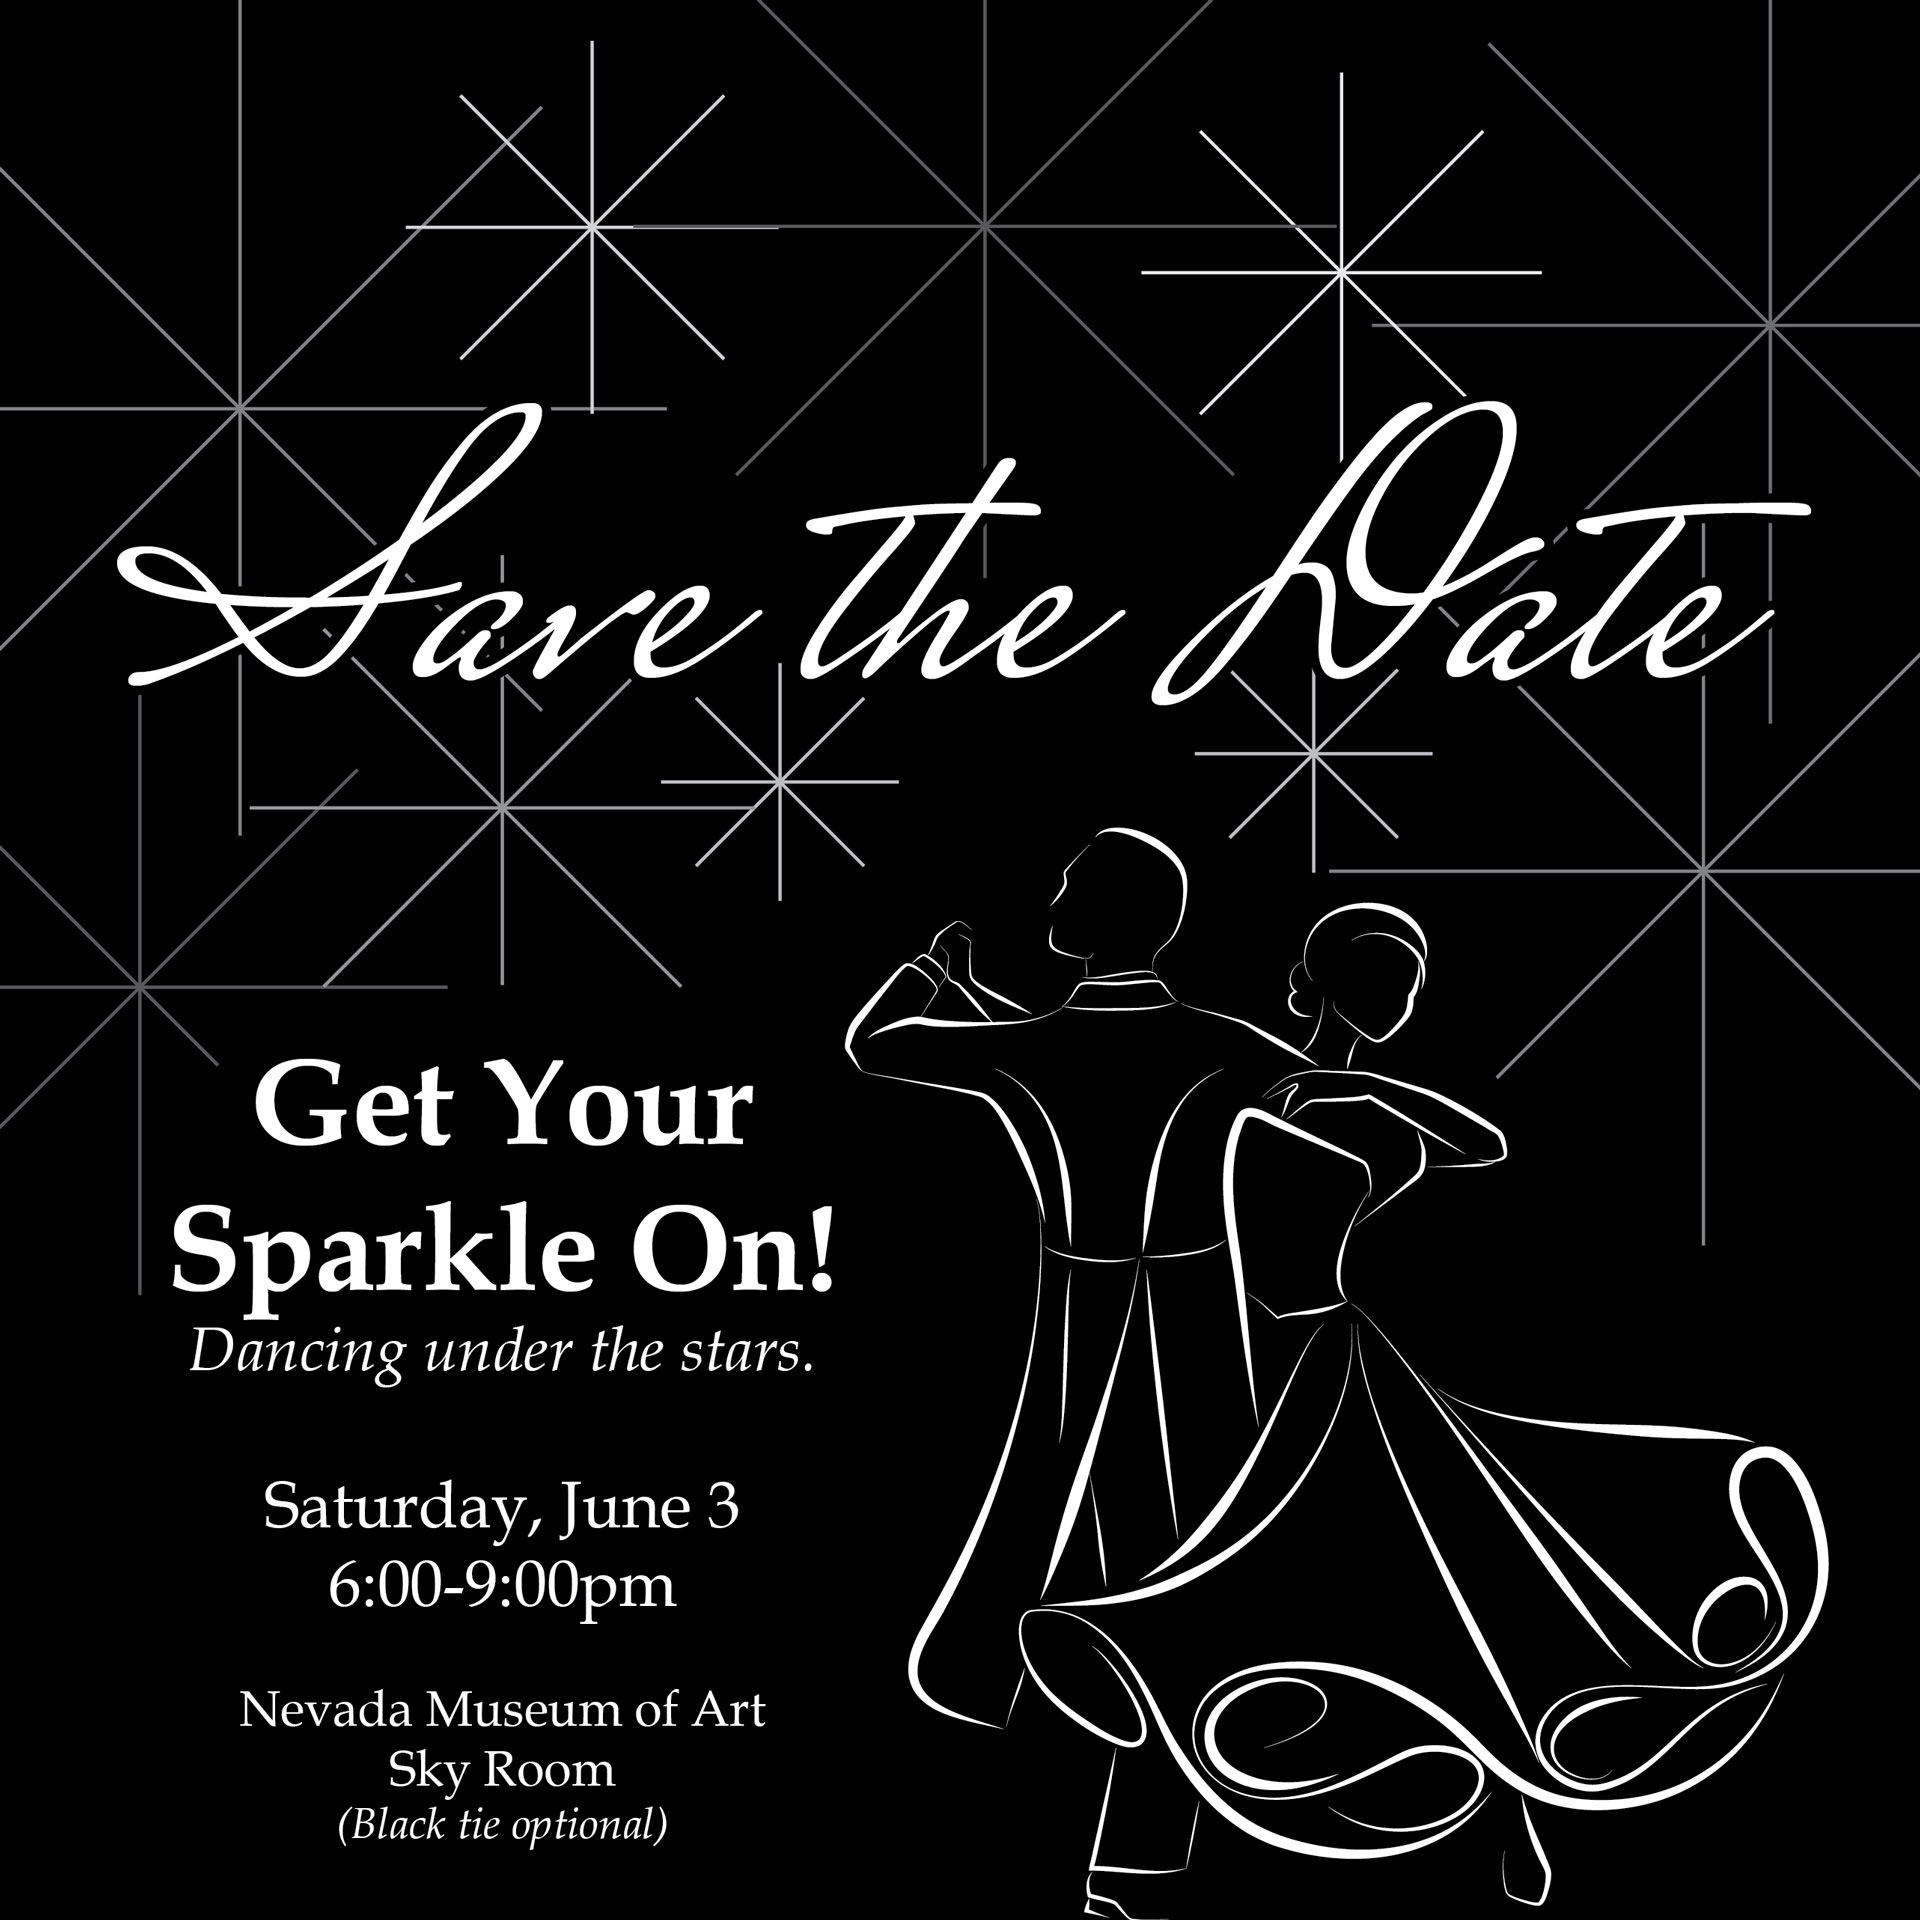 get your sparkle on event poster